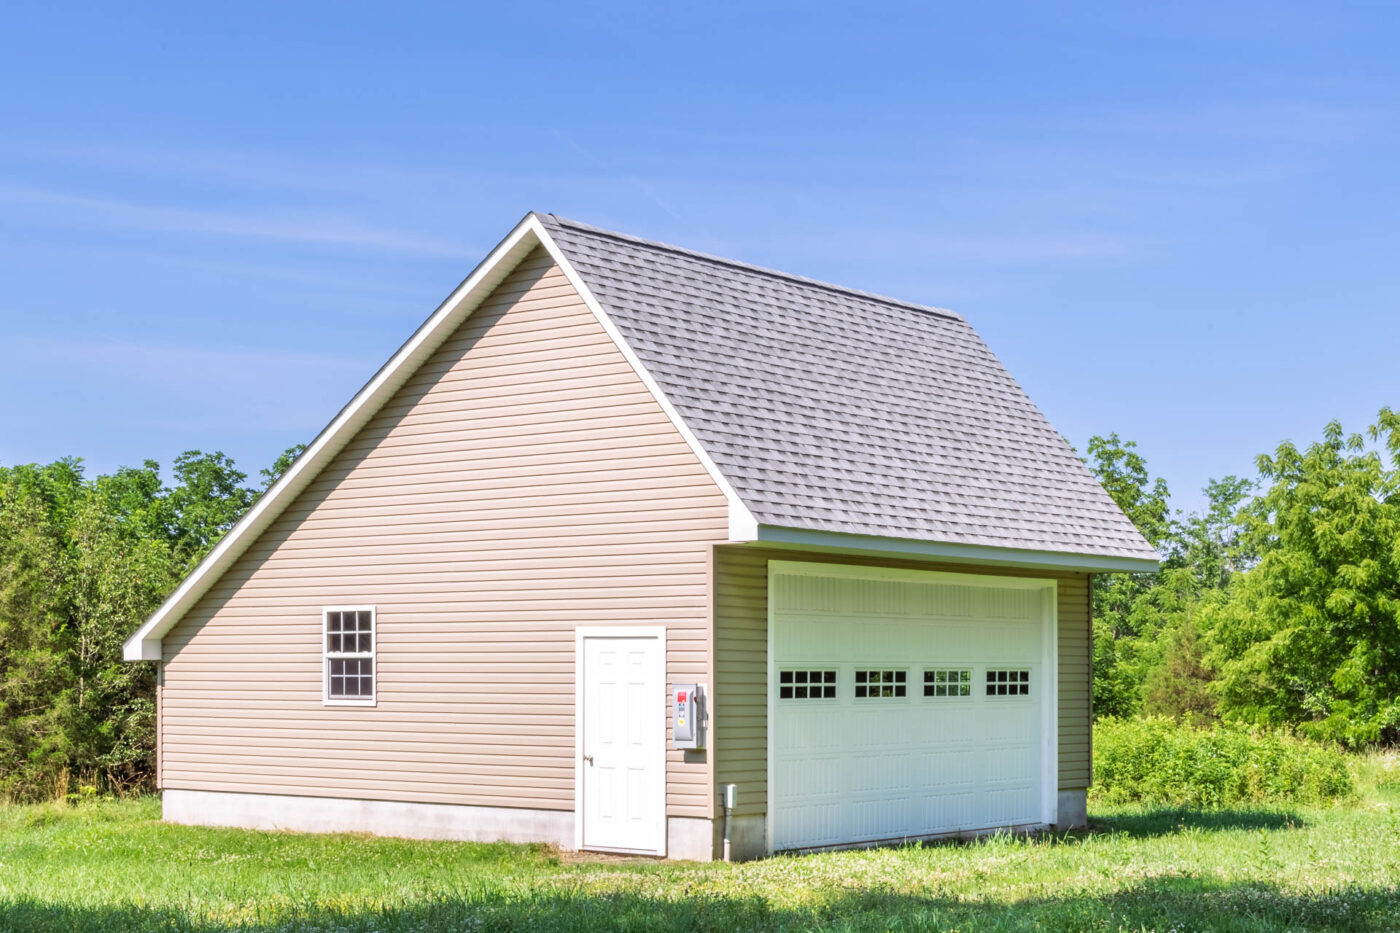 doublewide car garage for sale in ny 2